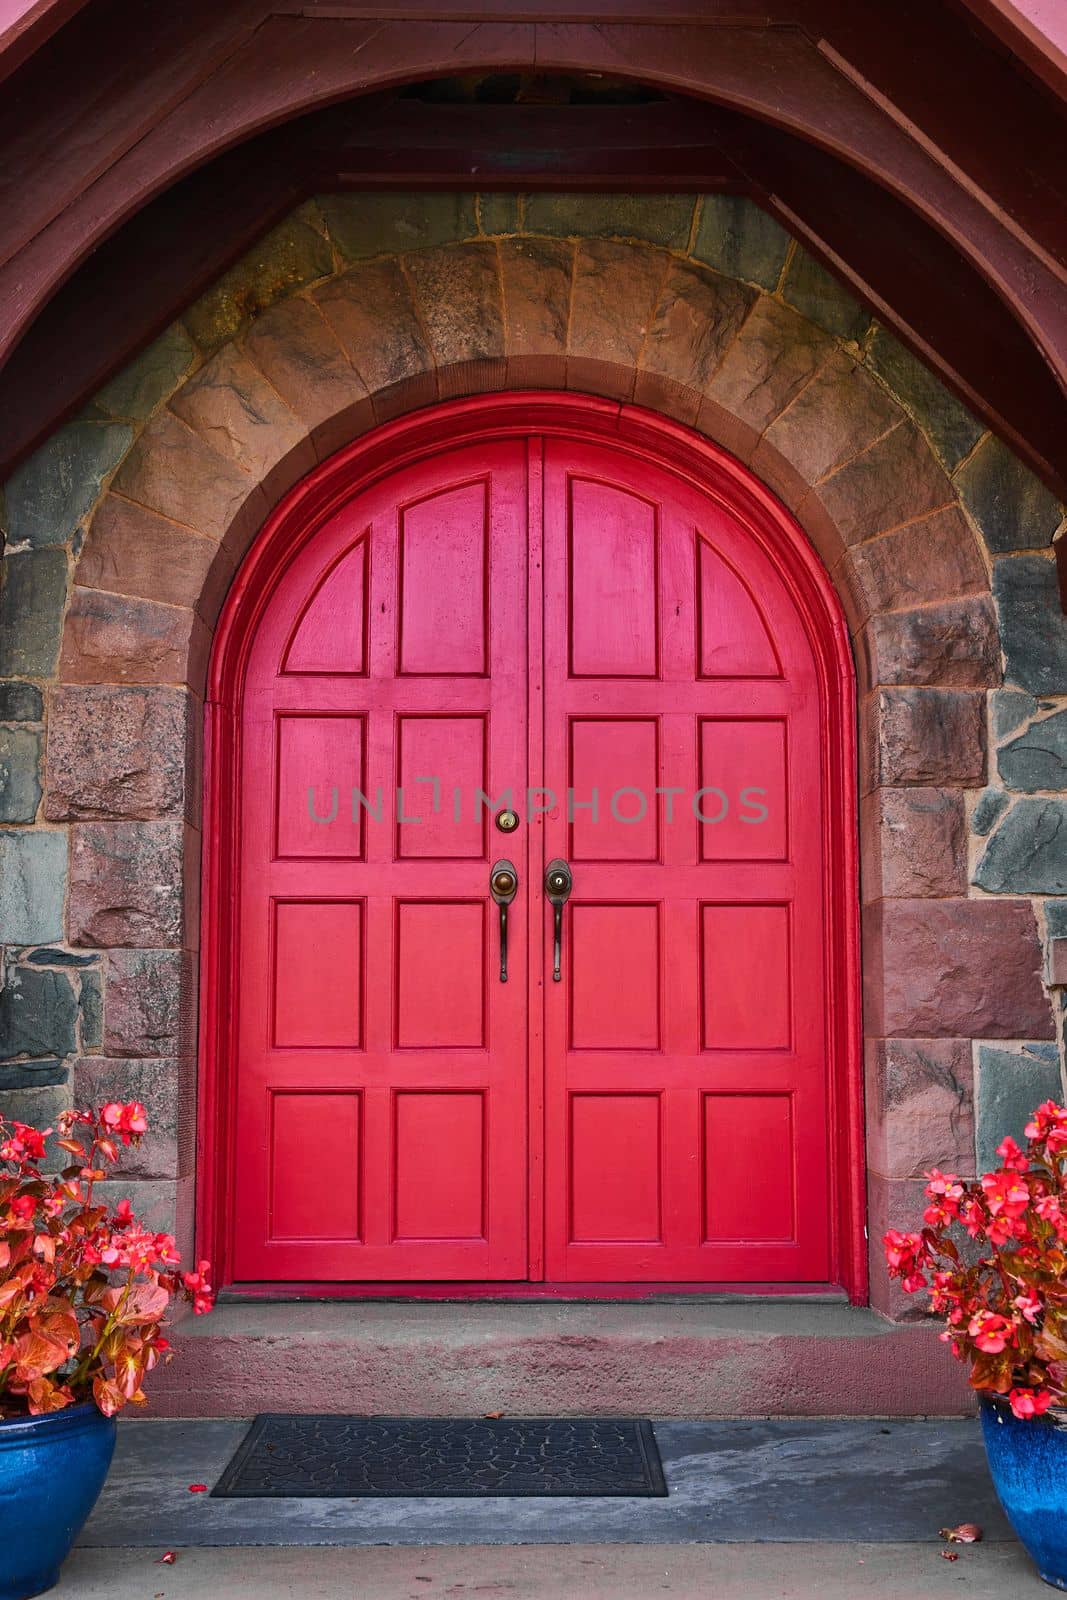 Image of Stunning vibrant red arched double doors with stone arch and pair of red plants in blue pots